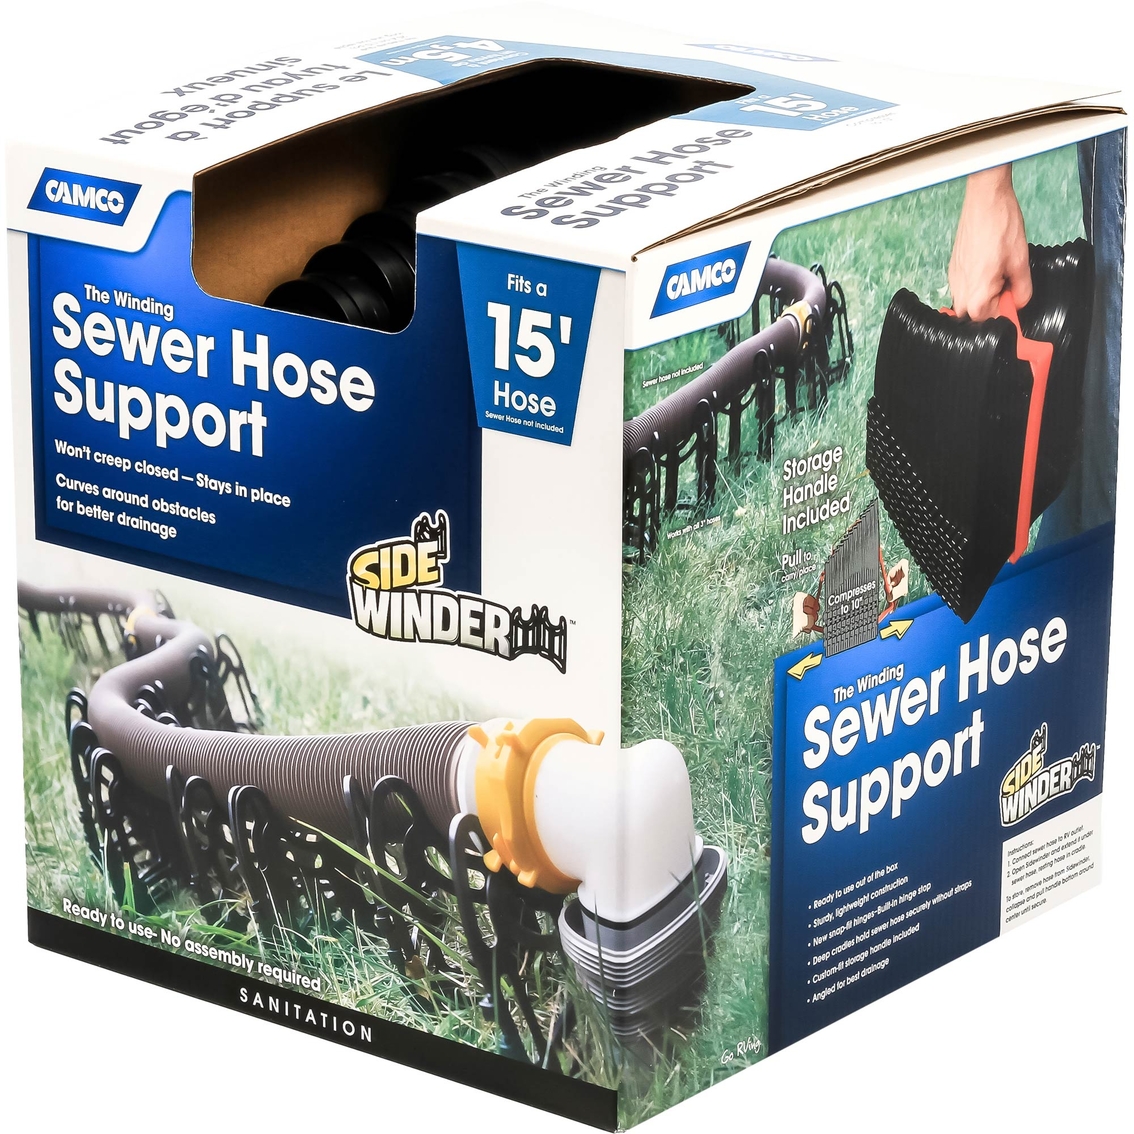 Camco Sidewinder 15 ft. Plastic Sewer Hose Support - Image 2 of 8